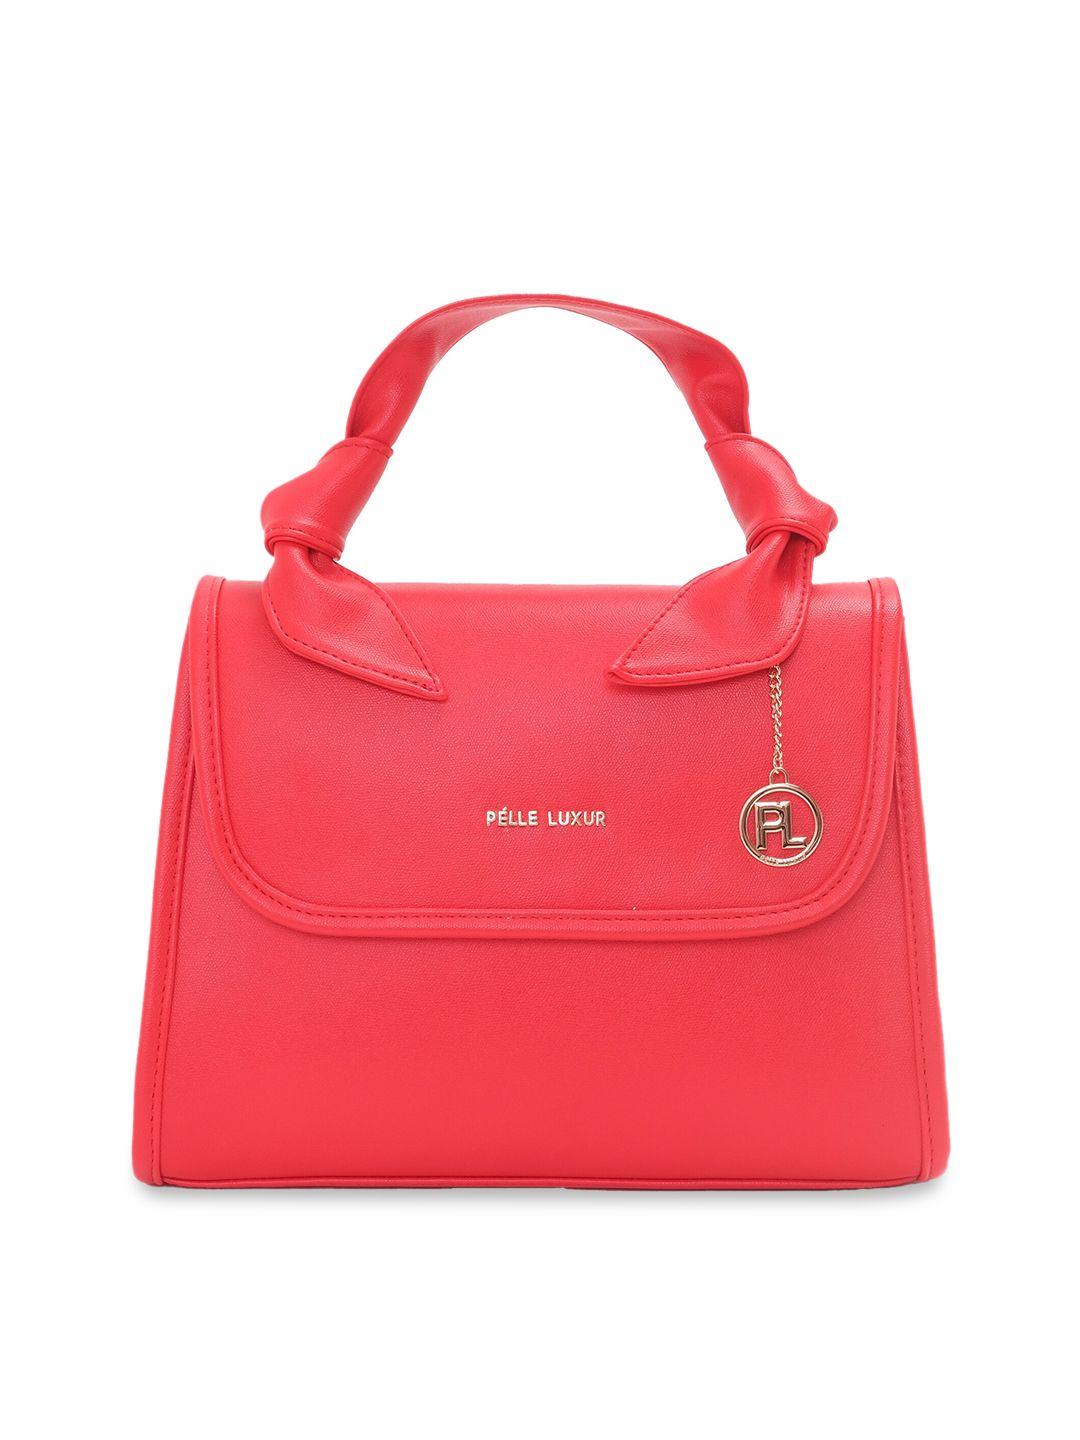 pelle luxur red leather structured handheld bag